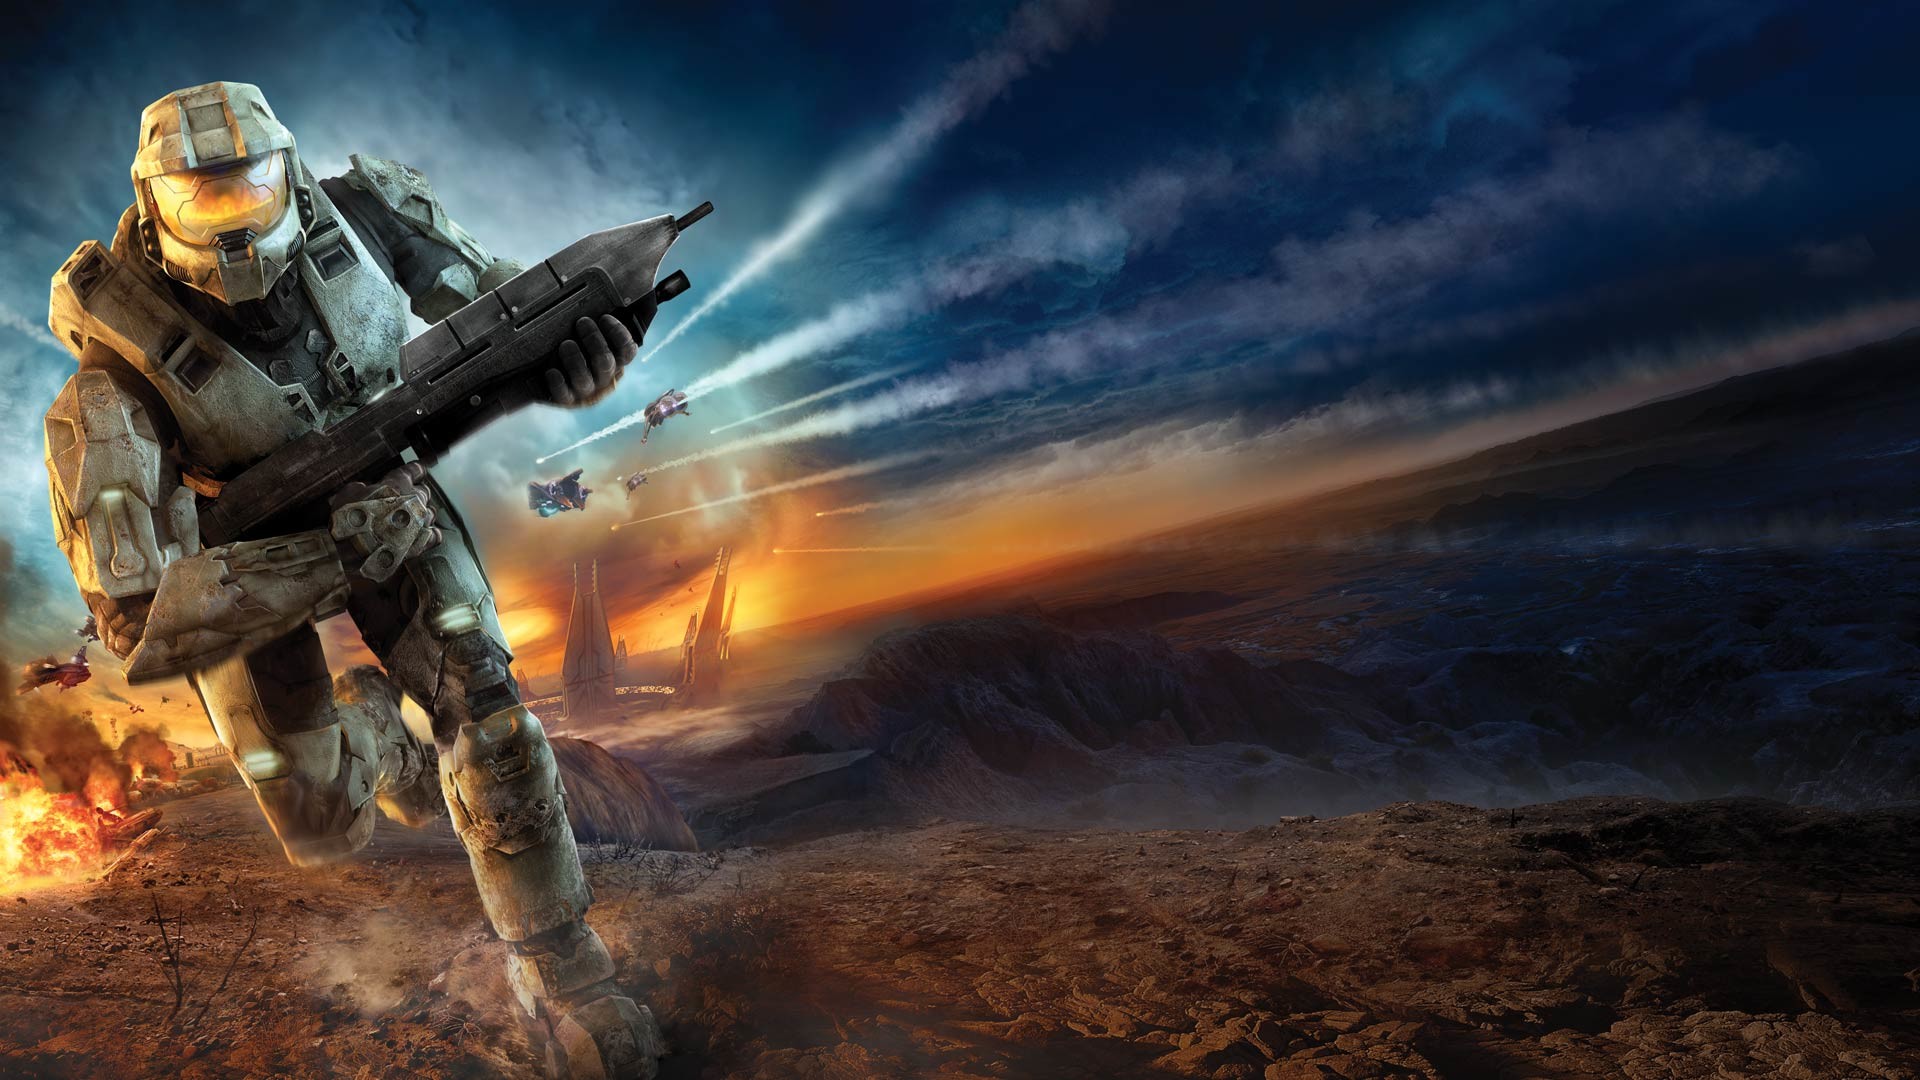 High Resolution Halo 3 Odst Wallpaper HD 12 Game Full Size Download Wallpaper Pinterest Wallpaper